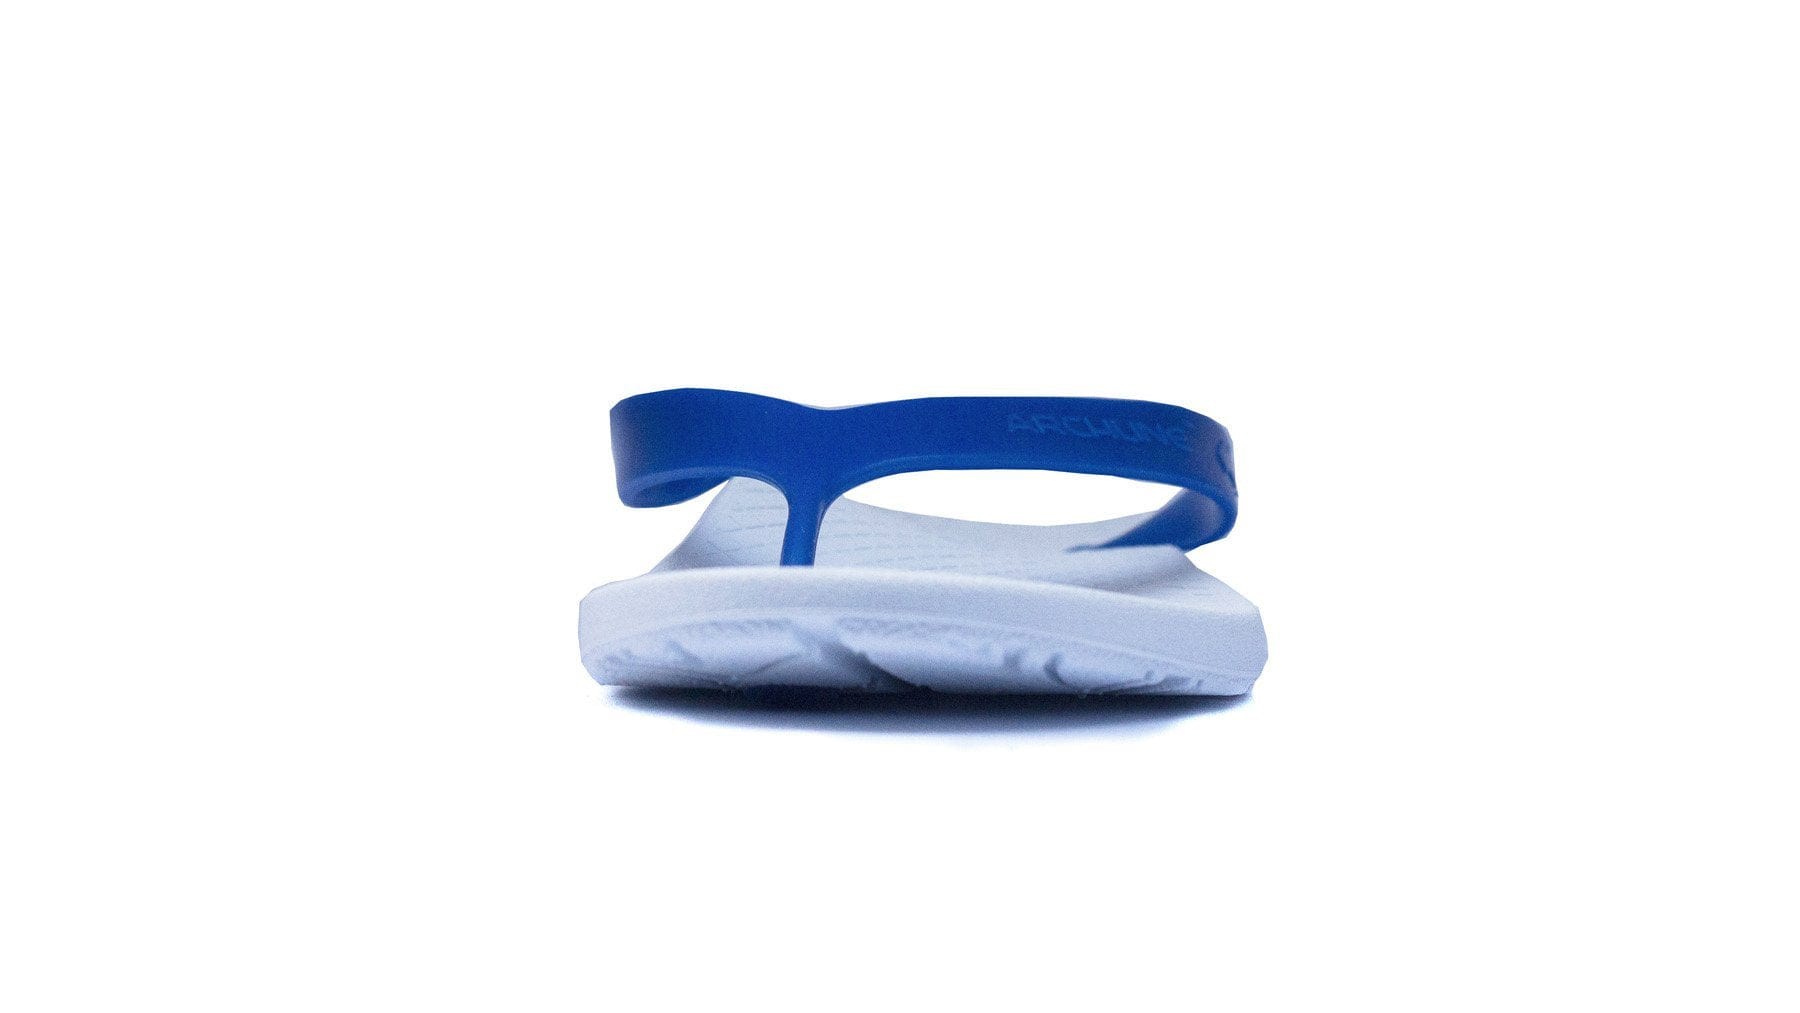 Archline Orthotic Arch Support Flip Flop Thongs (Blue / White